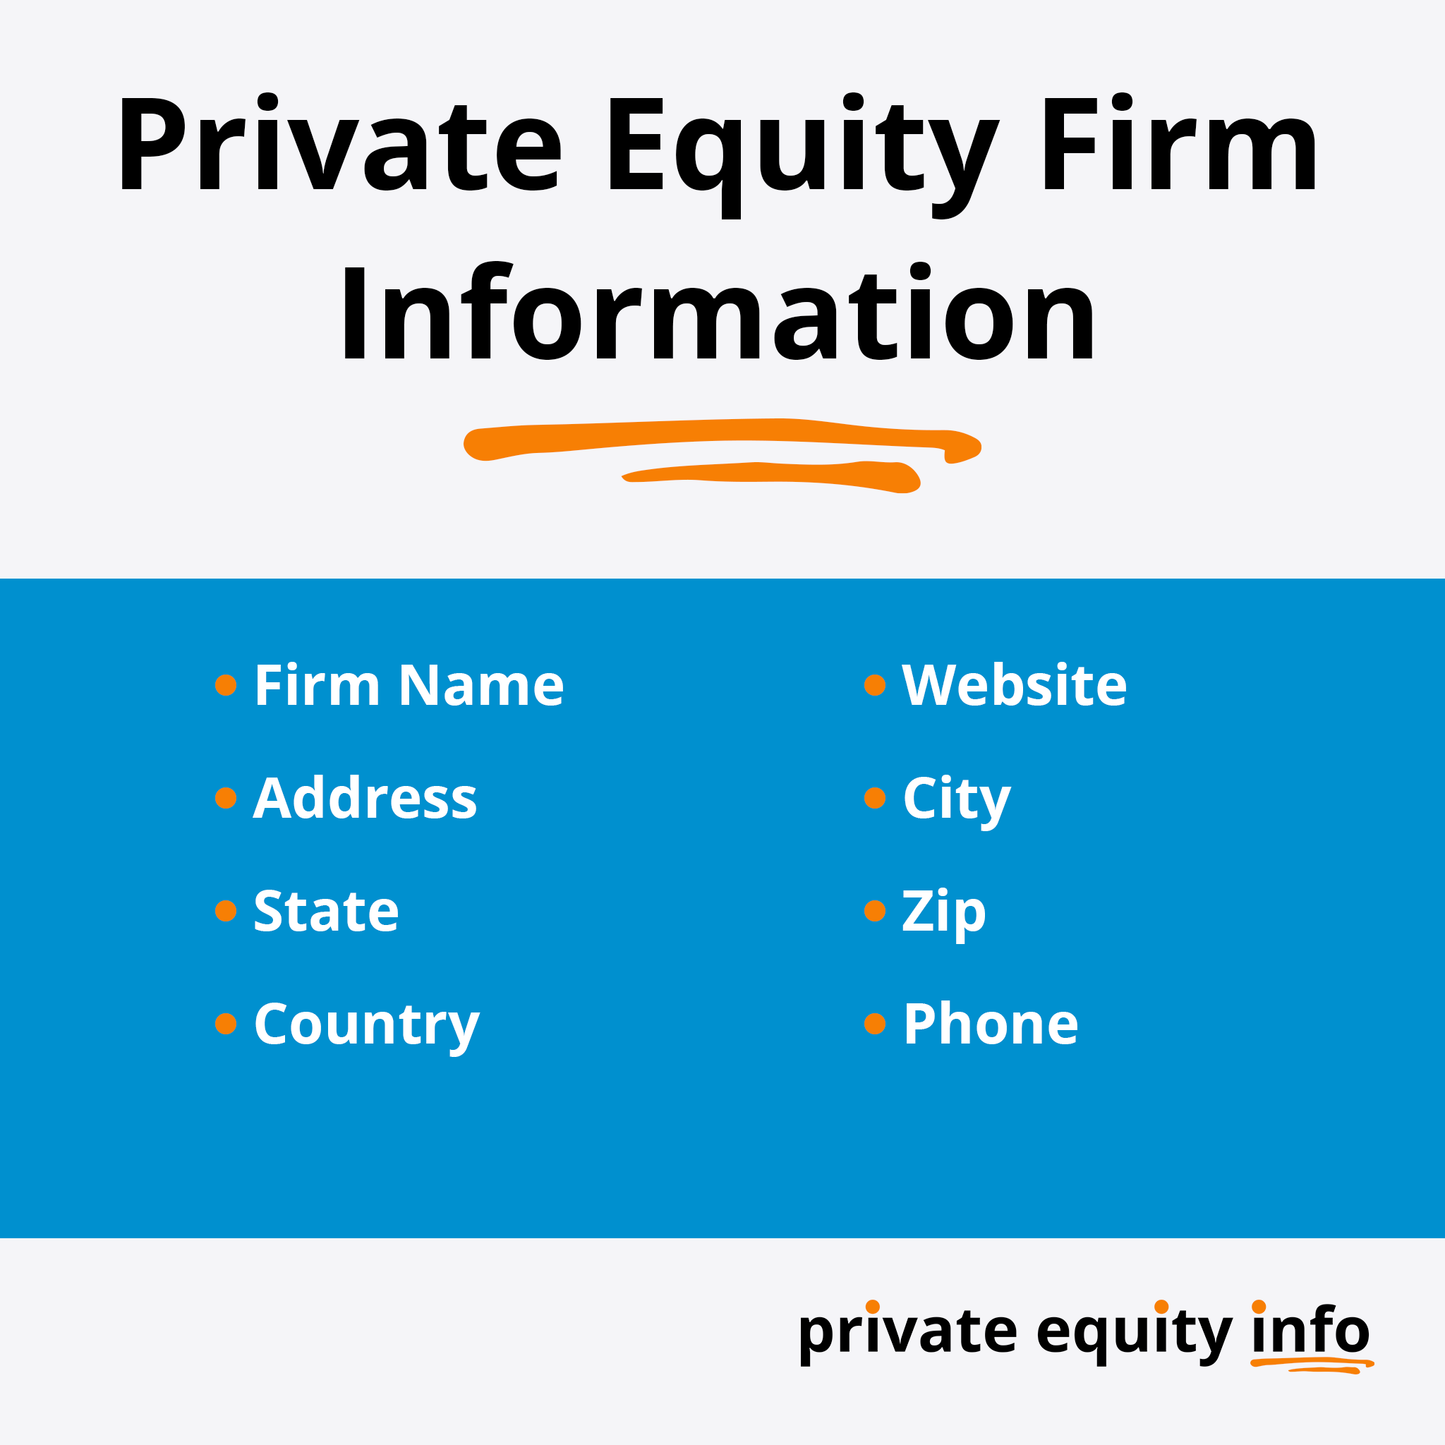 Private Equity Firms in Tennessee, Alabama and Kentucky